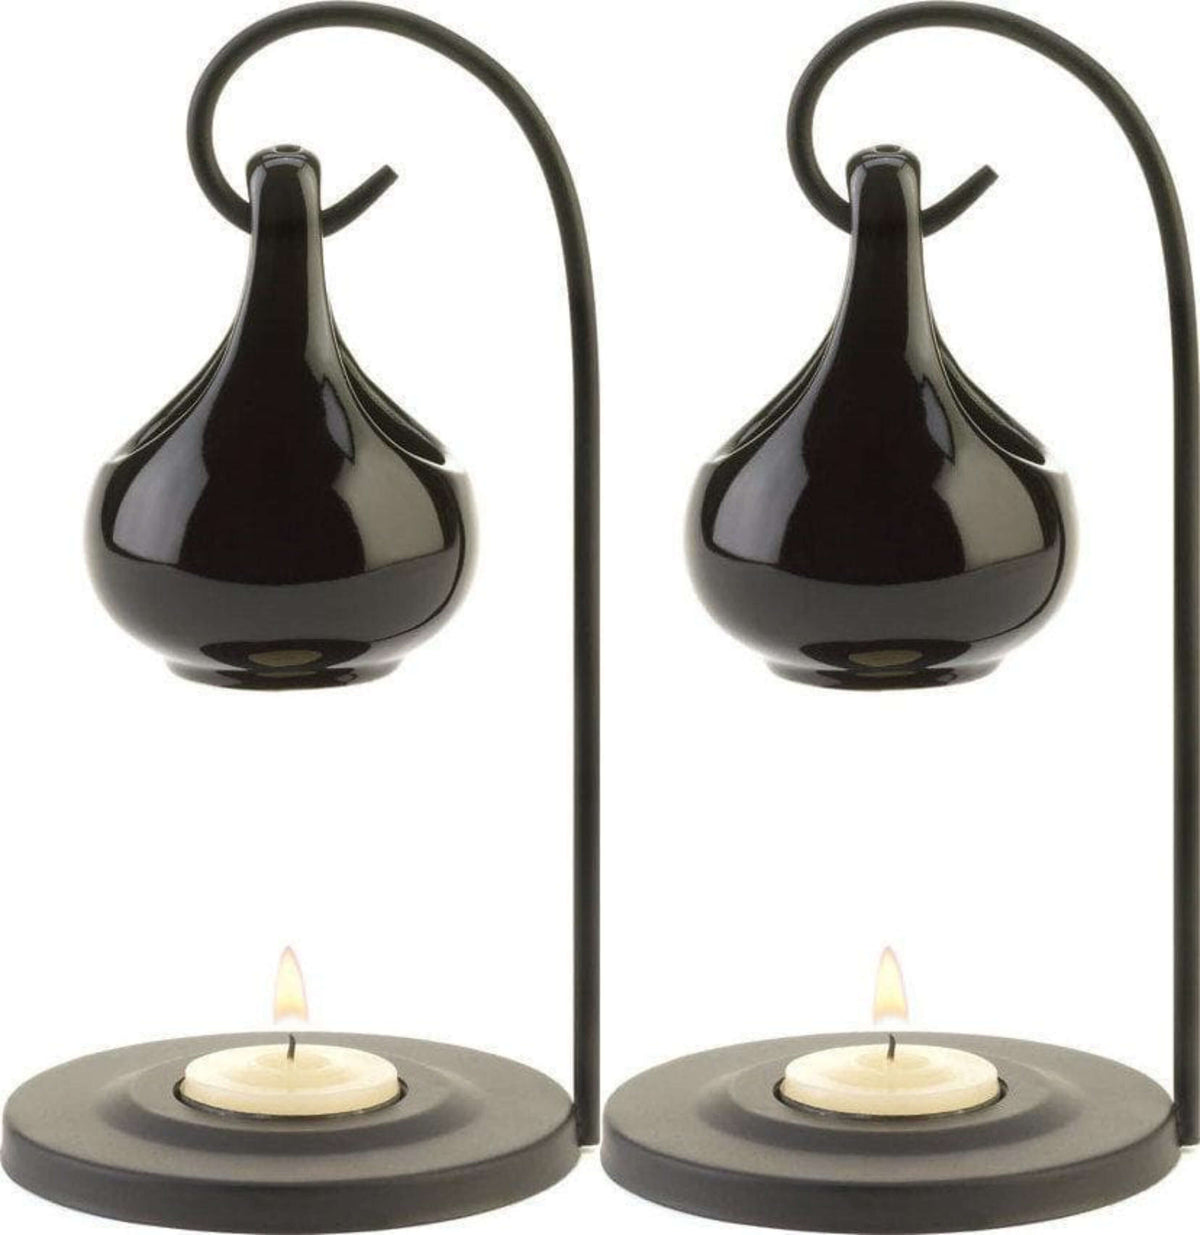 2 Tear Drop Oil Warmers - The House of Awareness